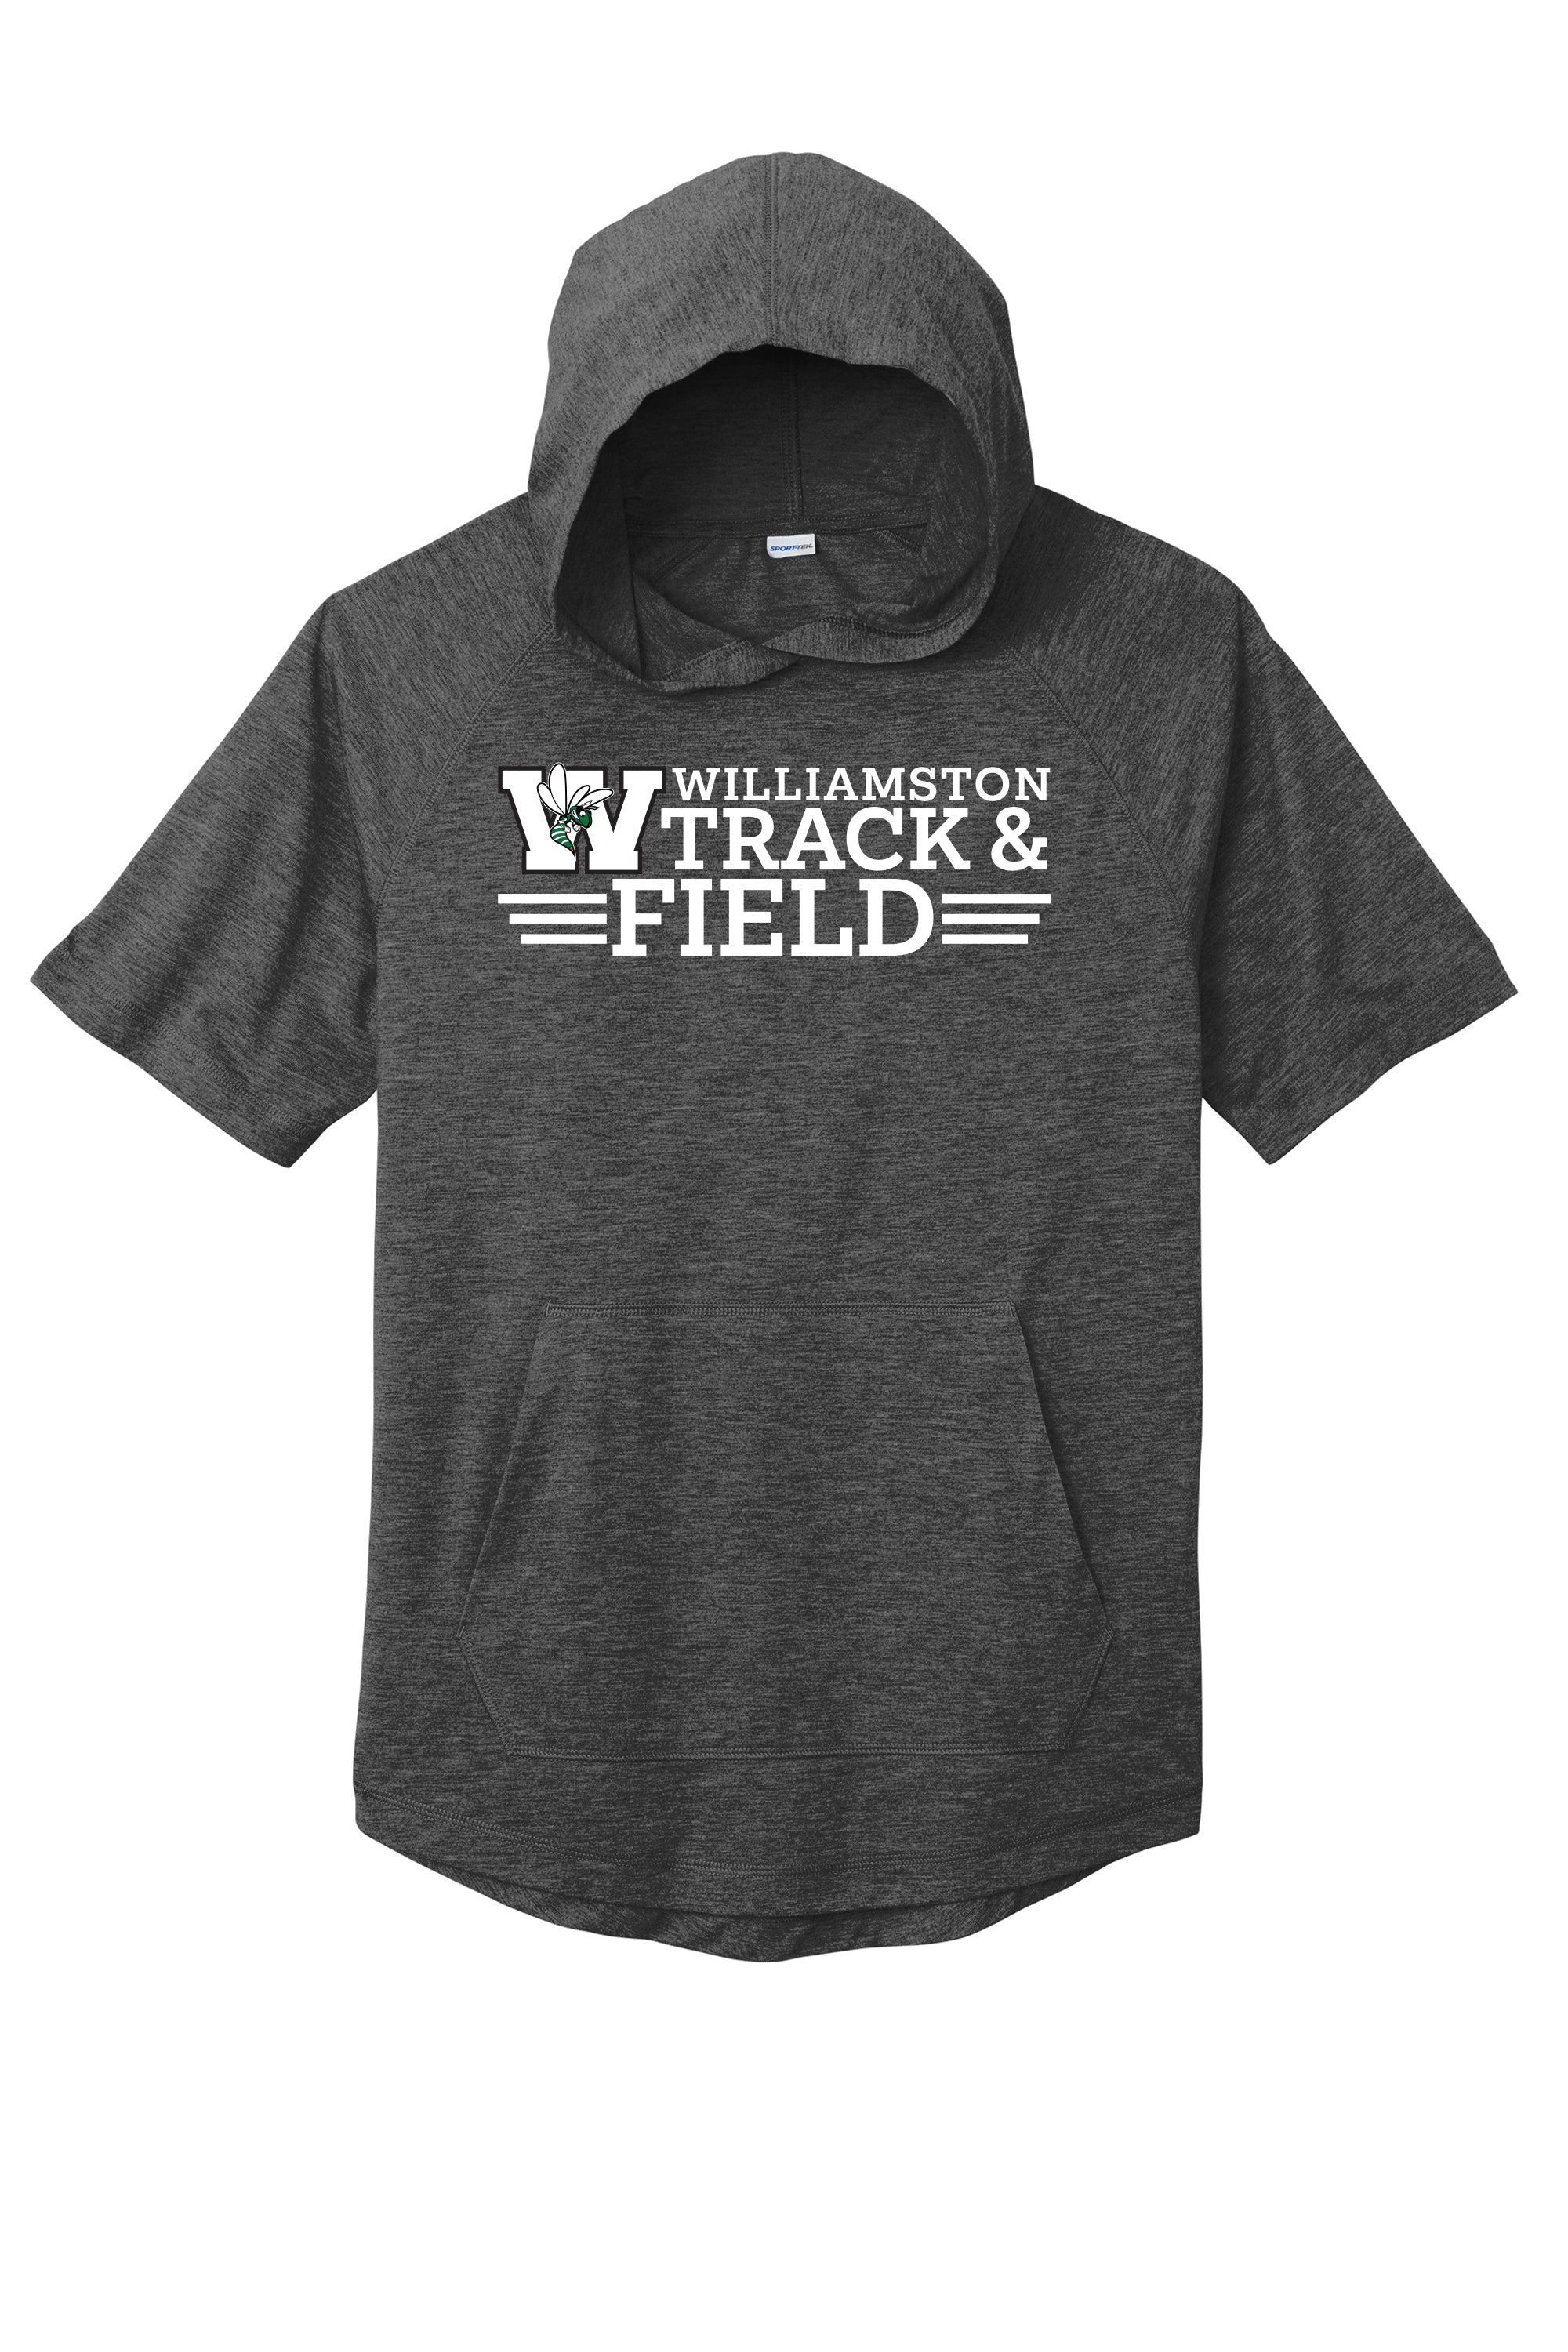 Williamston Track and Field - Short Sleeve Pullover Hoodie